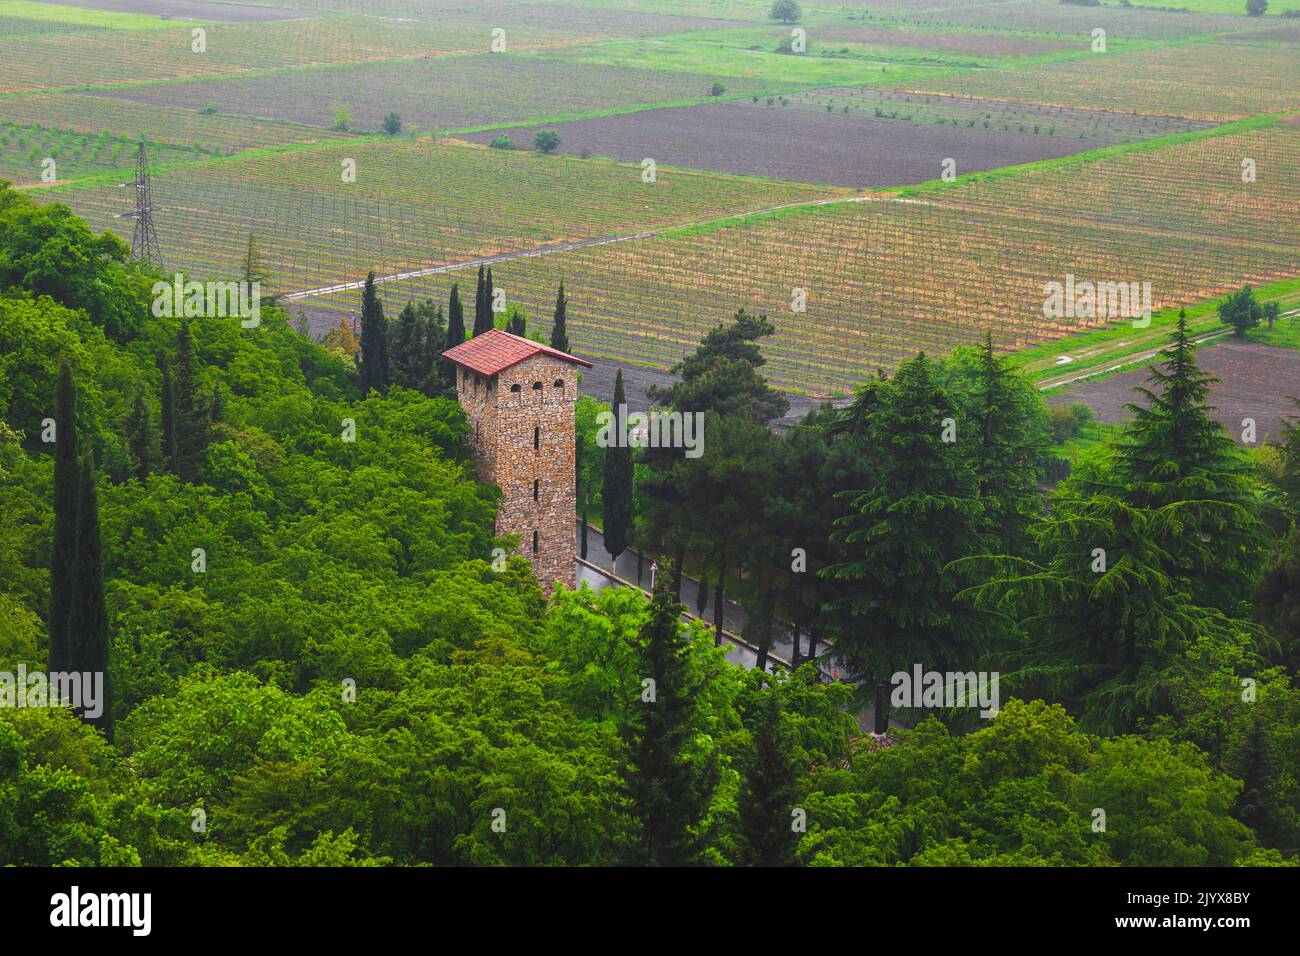 Alazani valley. Landscape with an old tower and grape fields Stock Photo